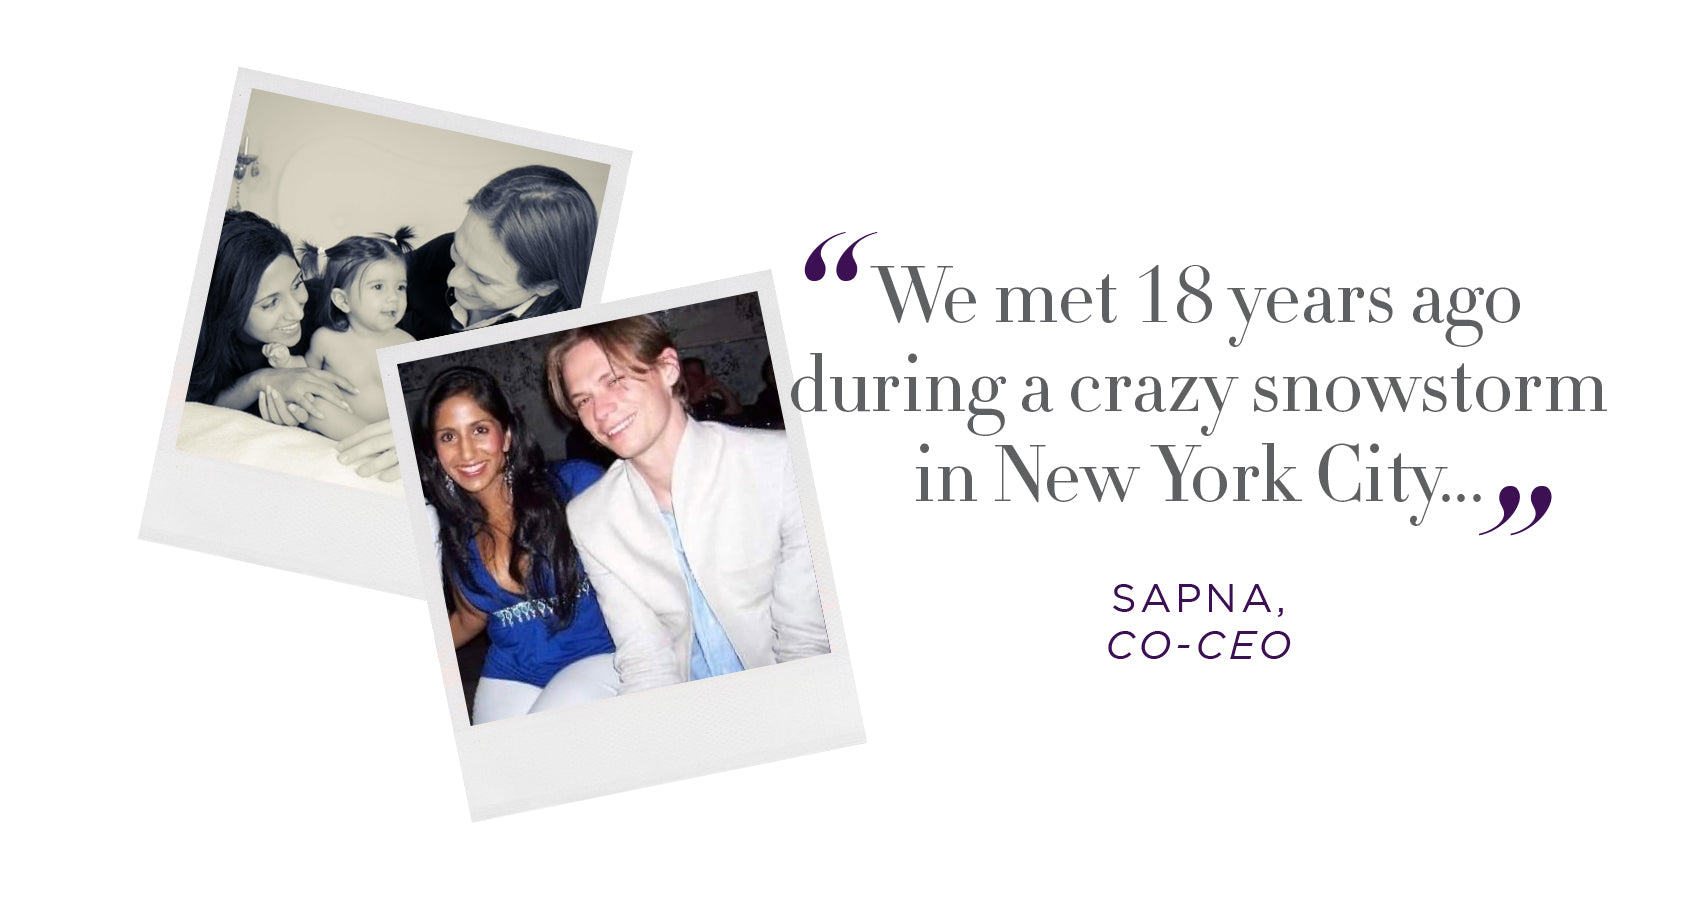 Old photos of our Co-CEO, Sapna, and her husband, Guido